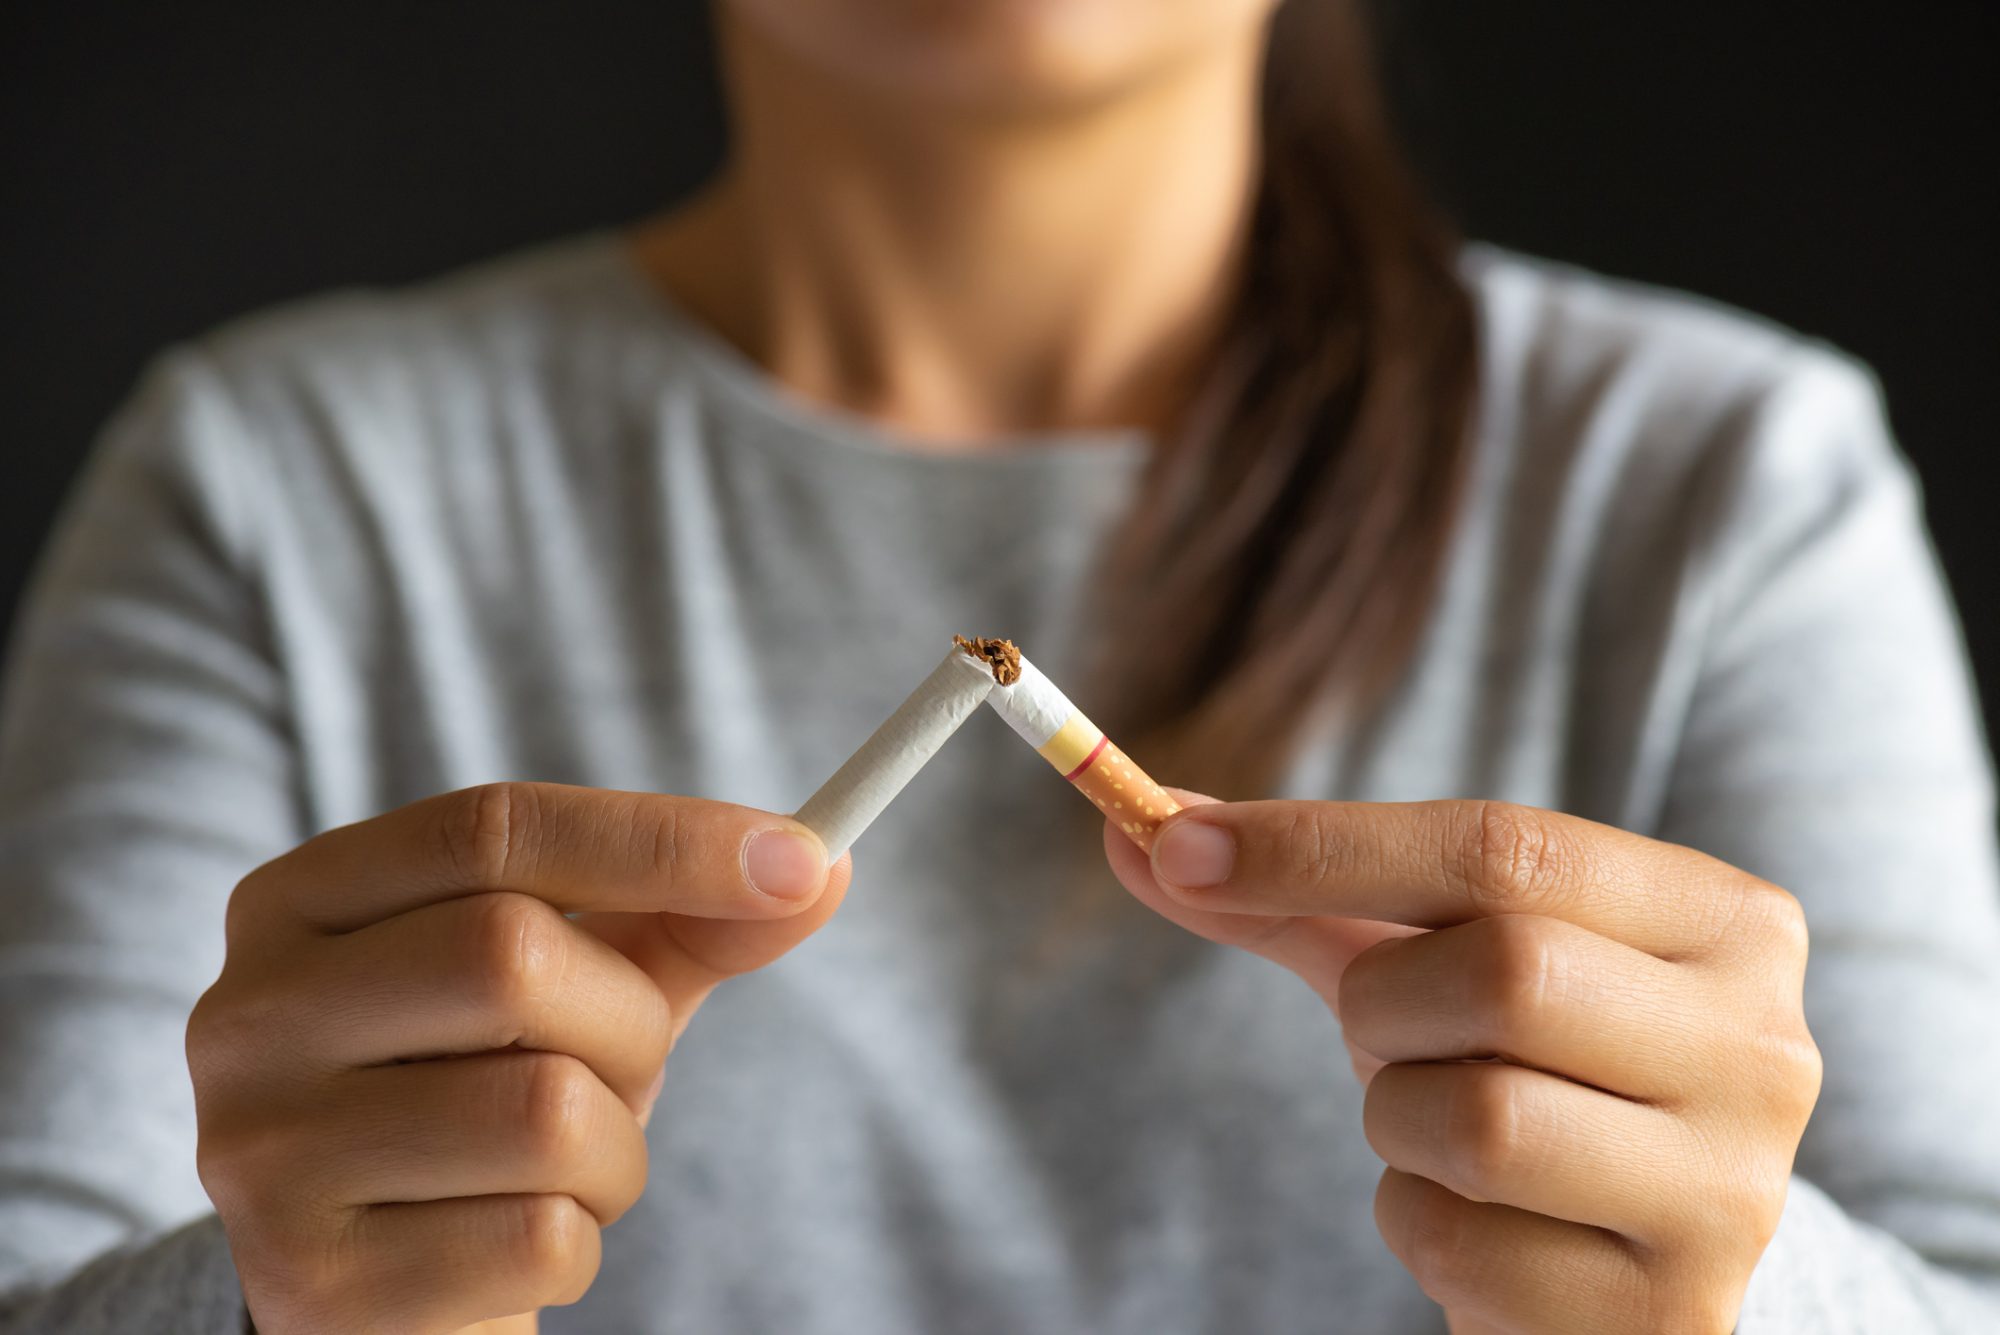 Quitting smoking proving tougher than you thought?